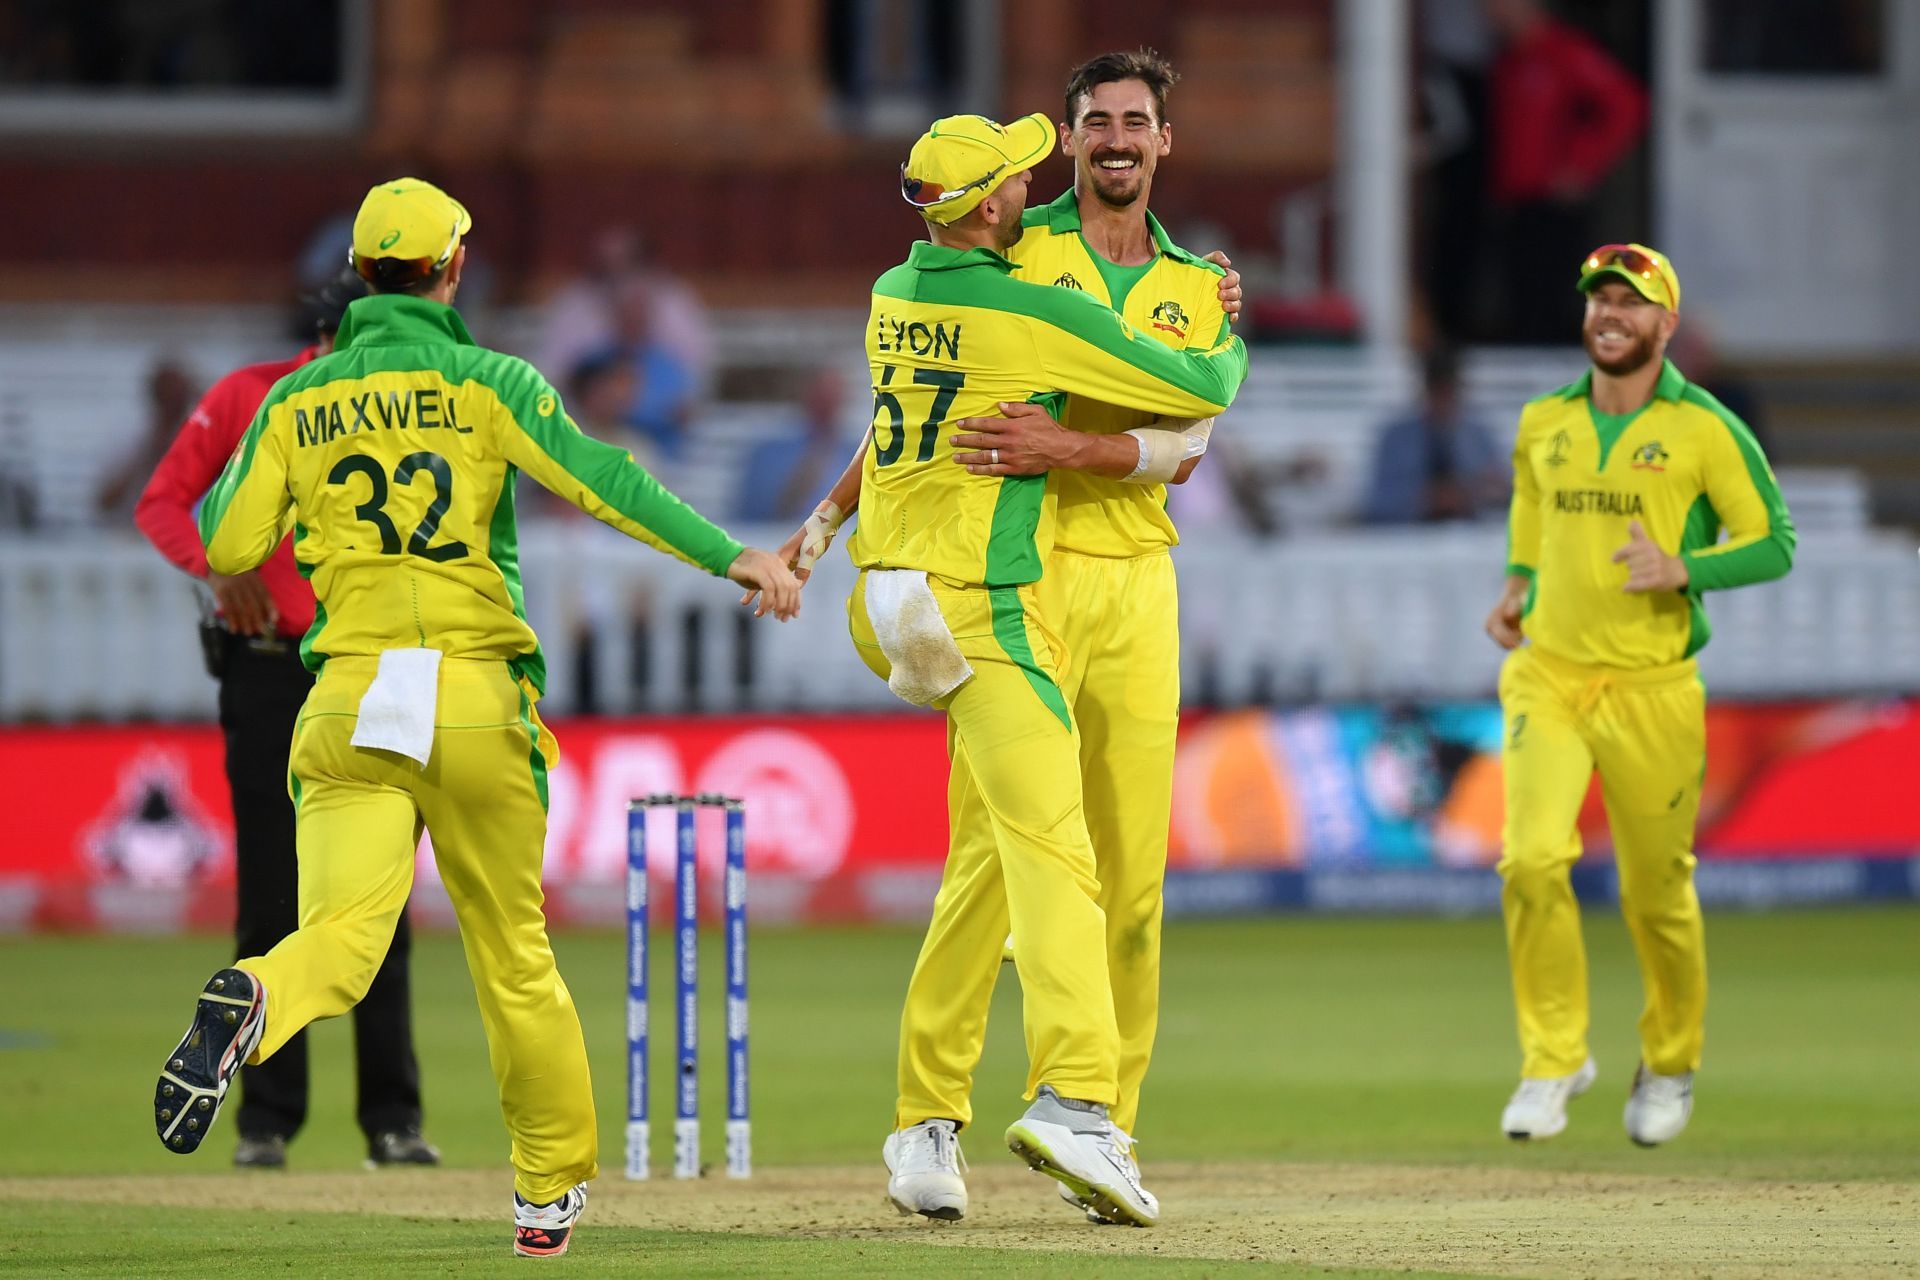 Mitchell Starc celebrates a wicket with teammates. Pic: Getty Images